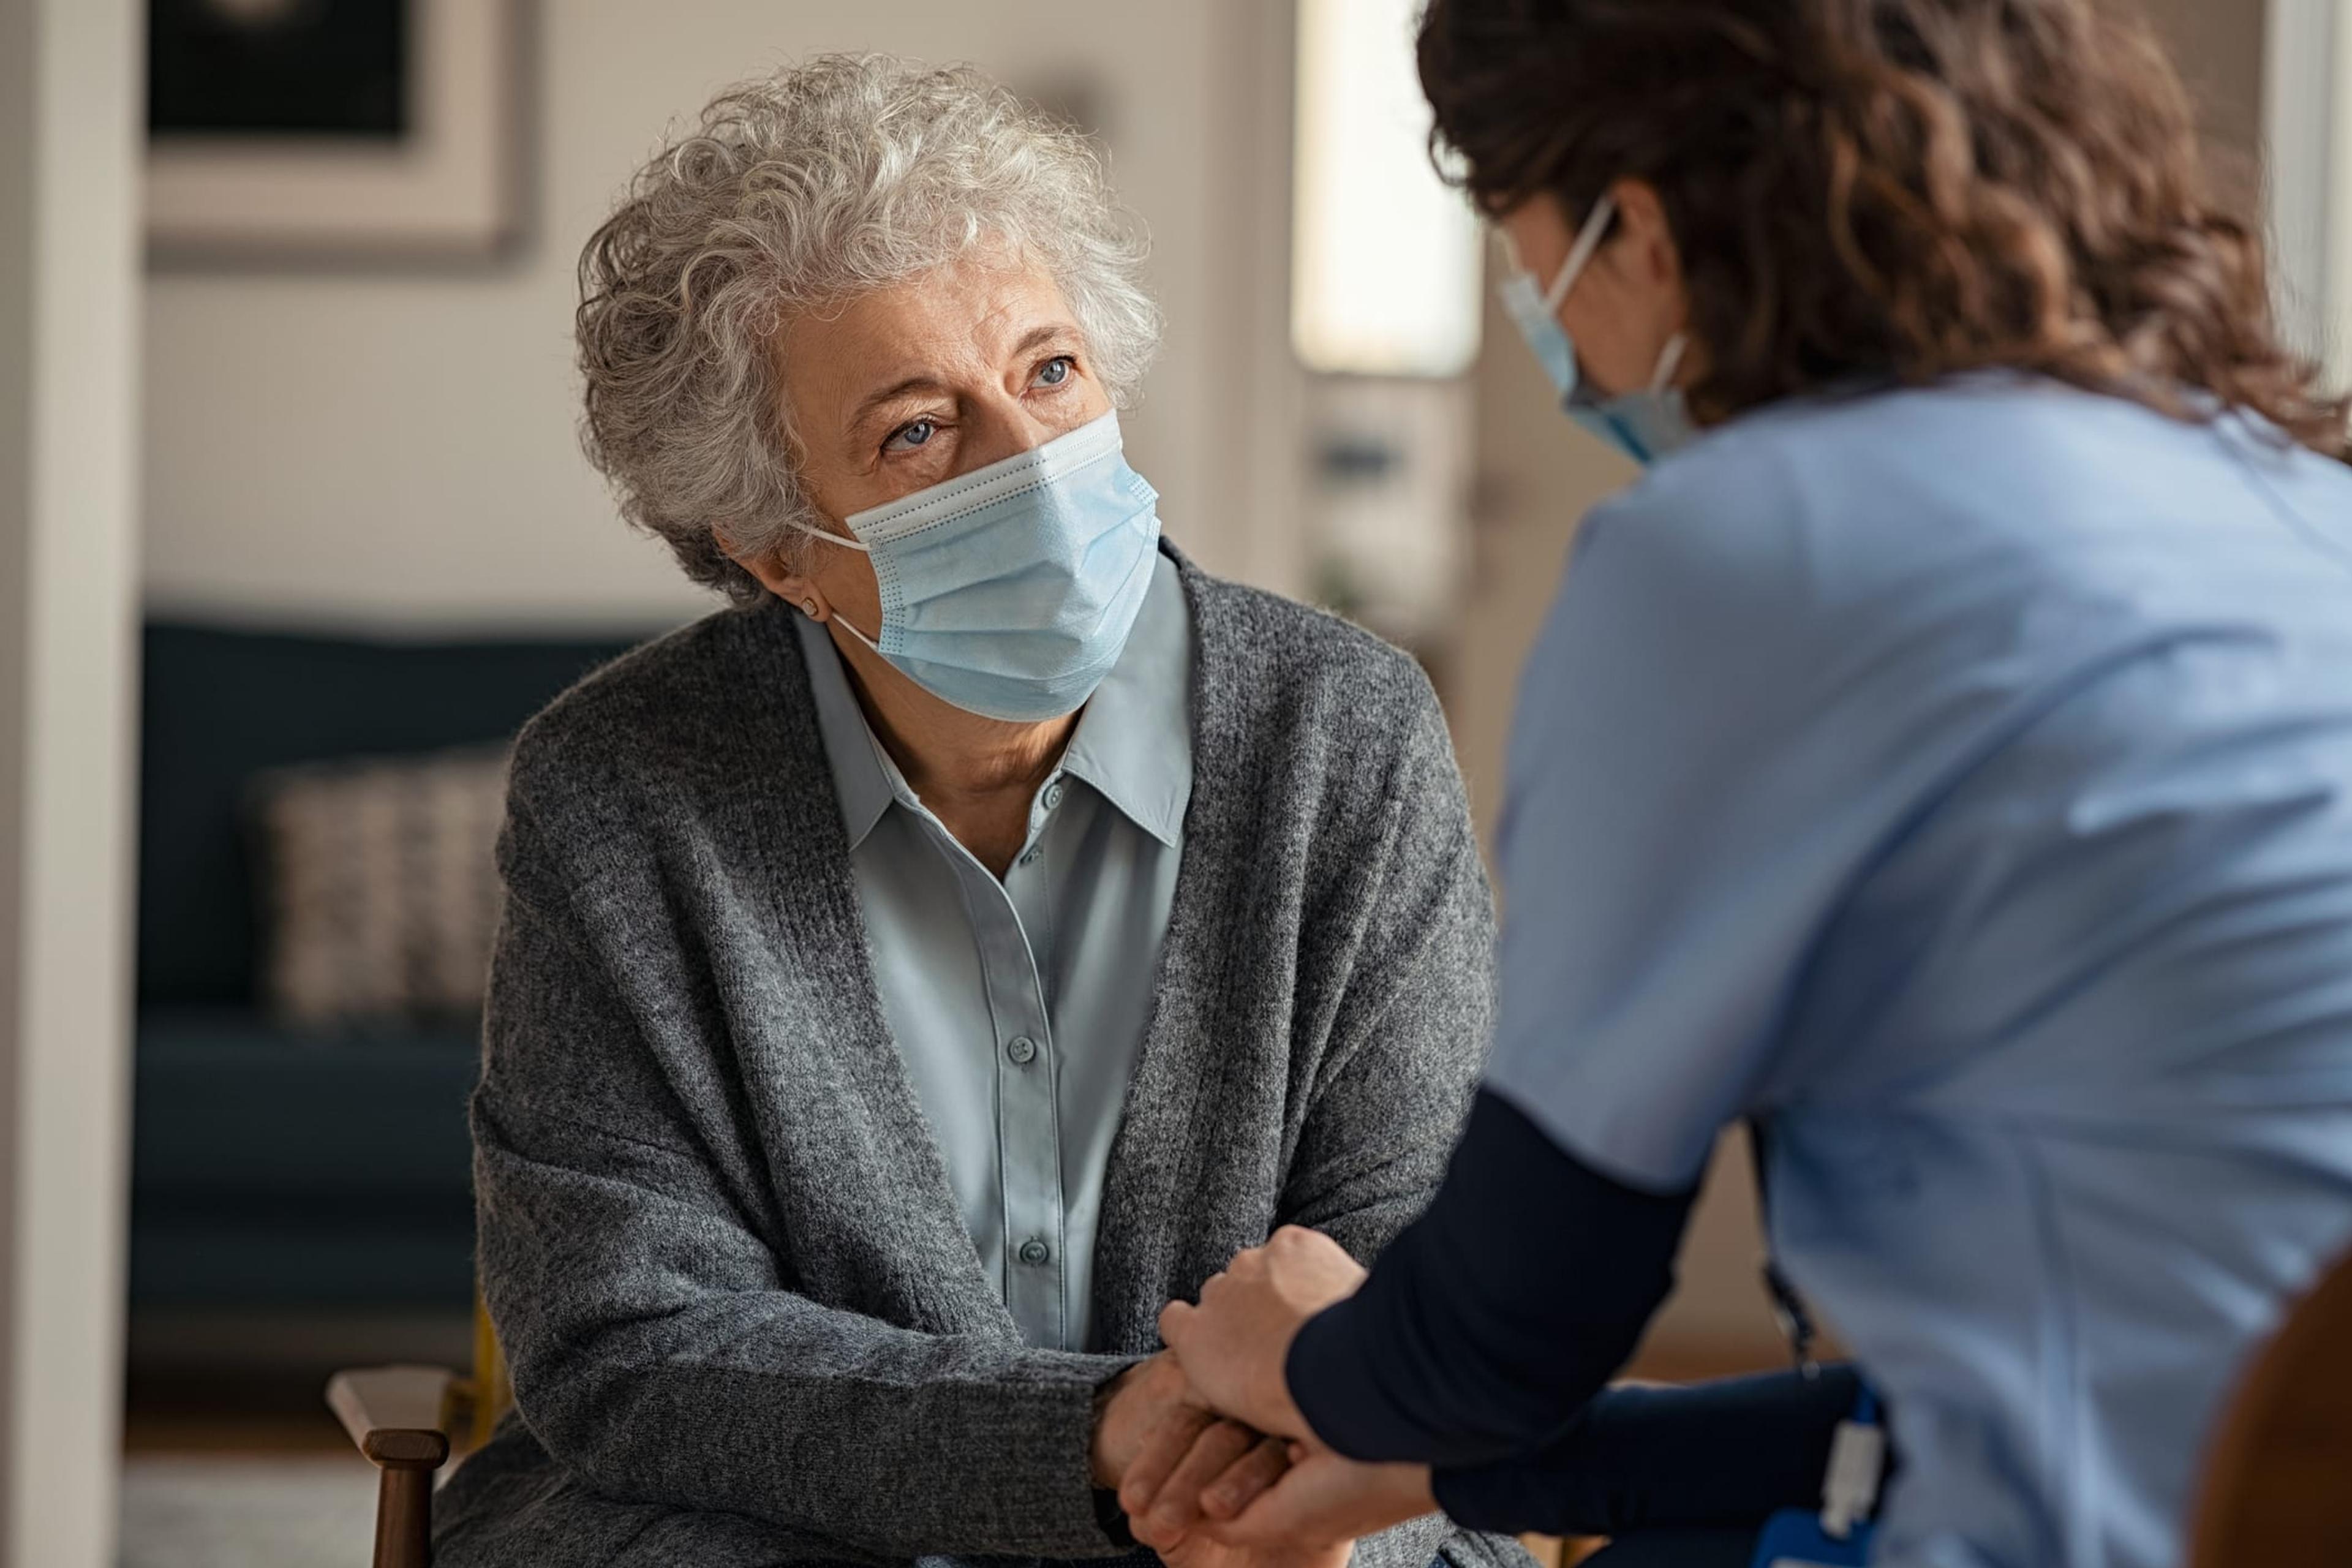 Home health care worker consoles an older woman